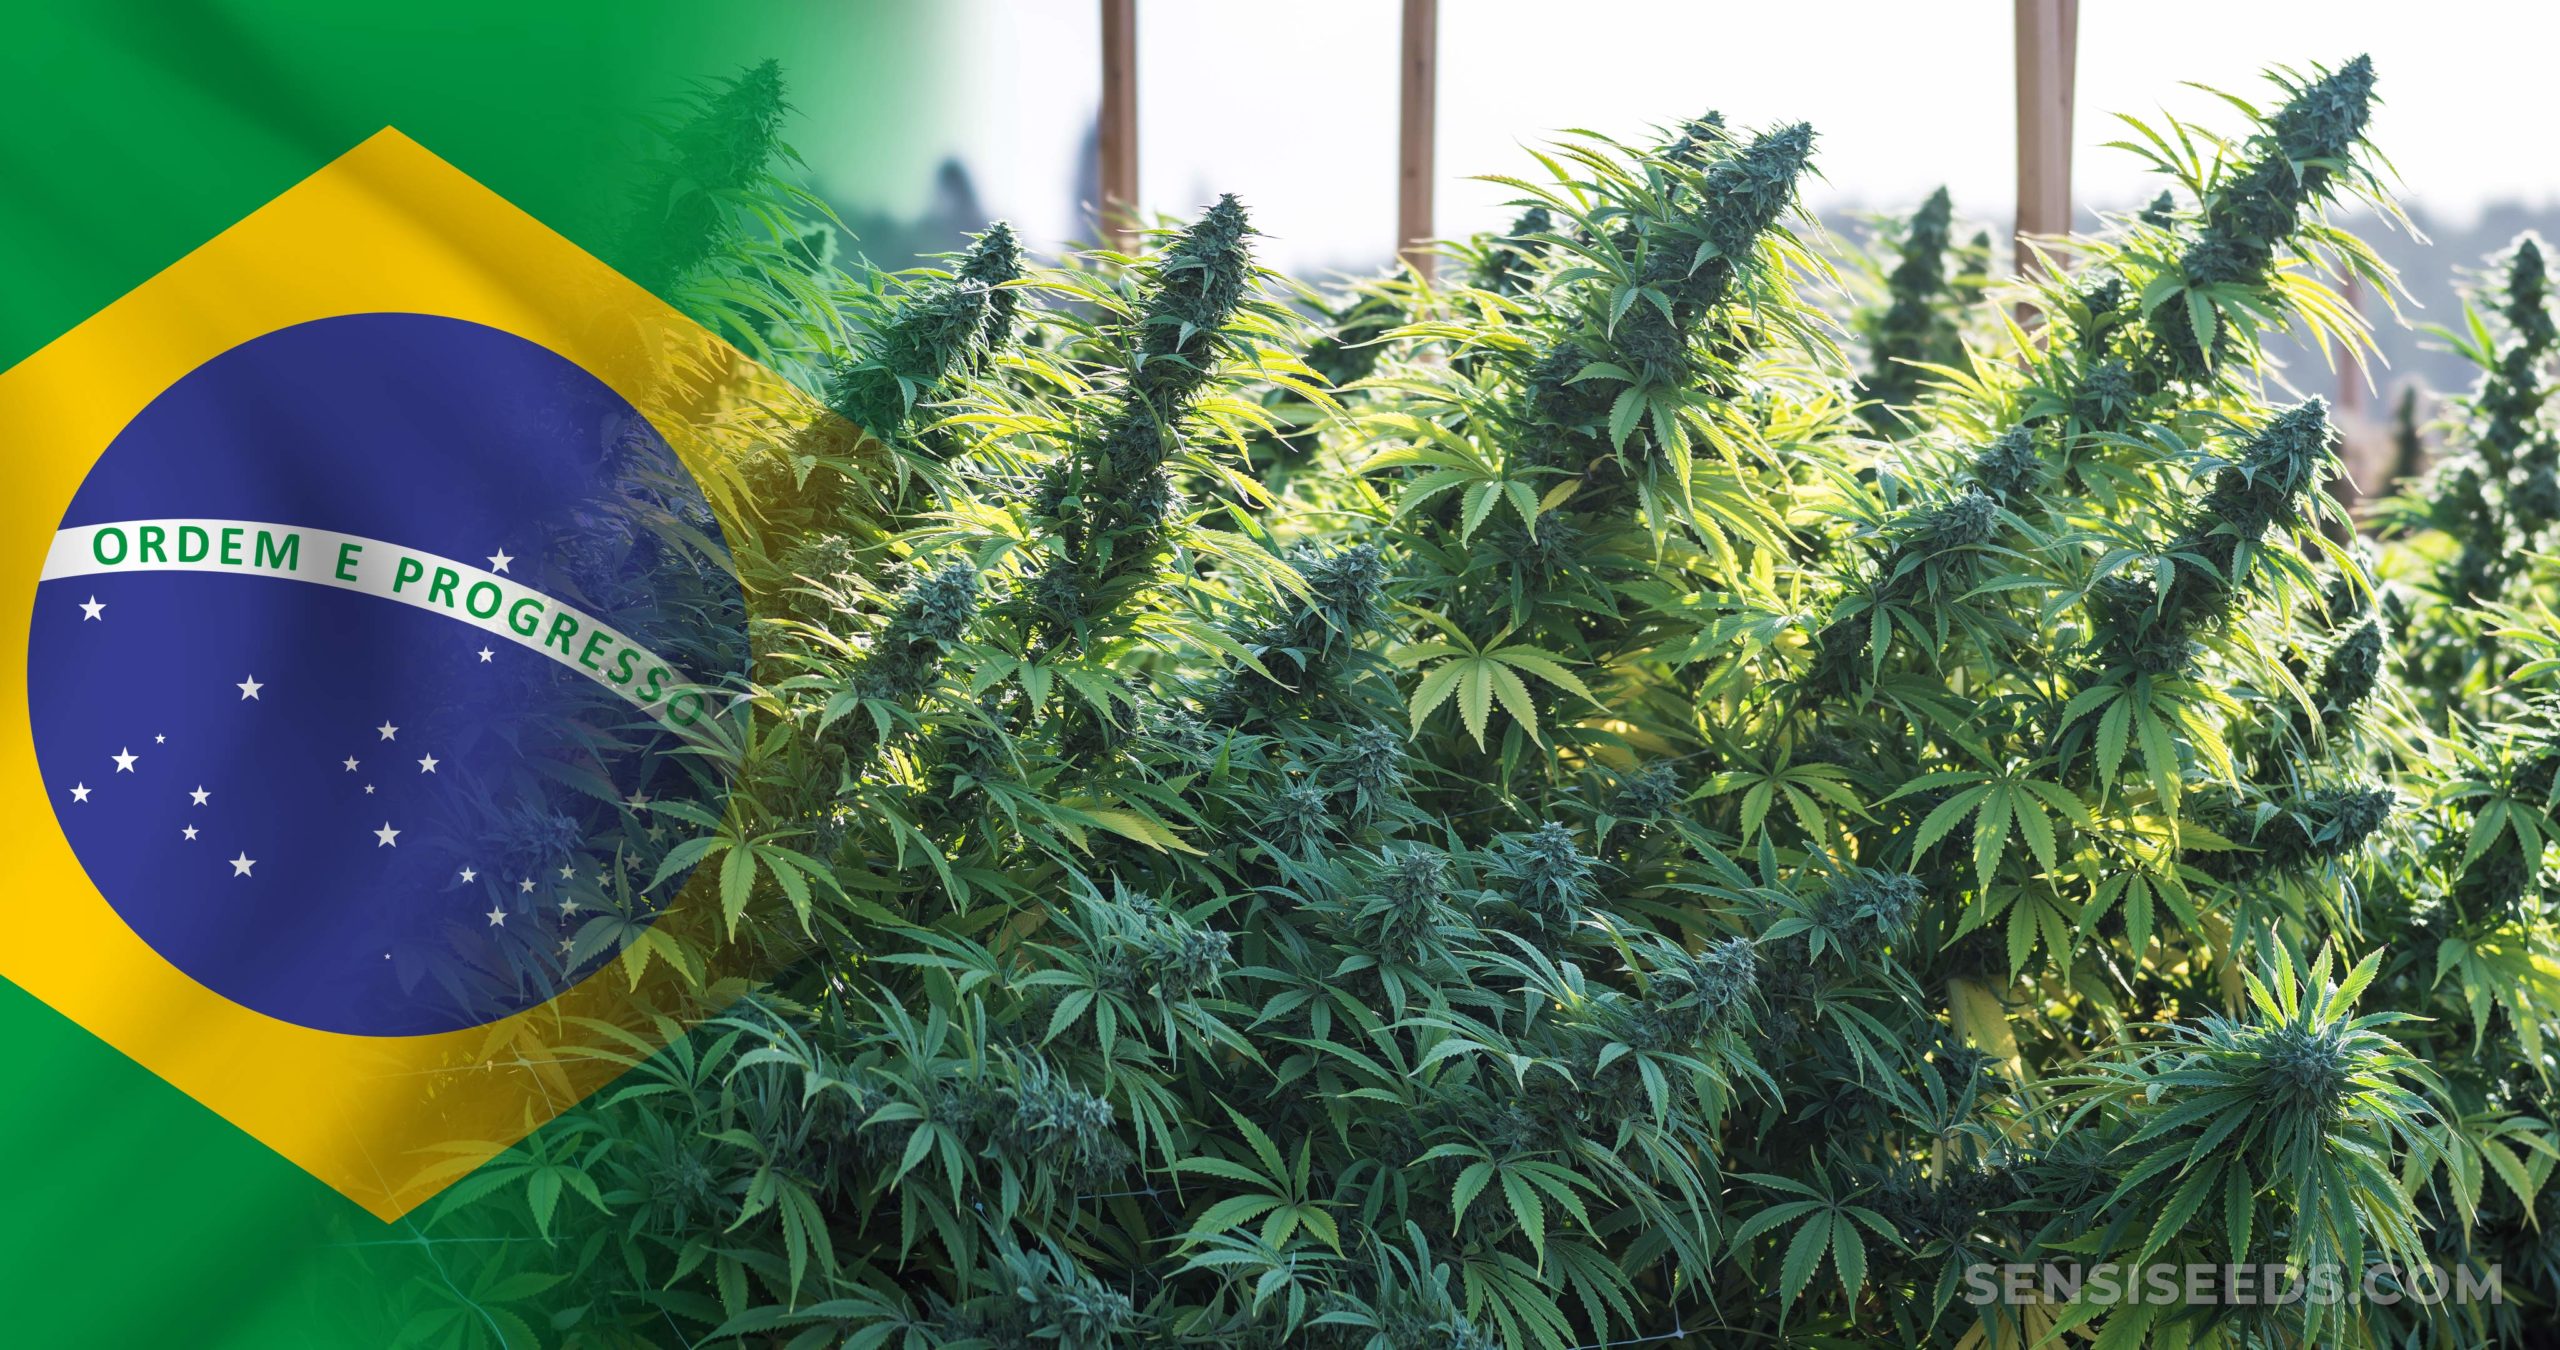 A Brazilian bill that would legalize medical marijuana and industrial hemp cultivation could soon have its first debate on the floor of the lower house of Congress, ahead of its expected approval in that chamber before the end of this year, federal deputy Paulo Teixeira told Marijuana Business Daily.